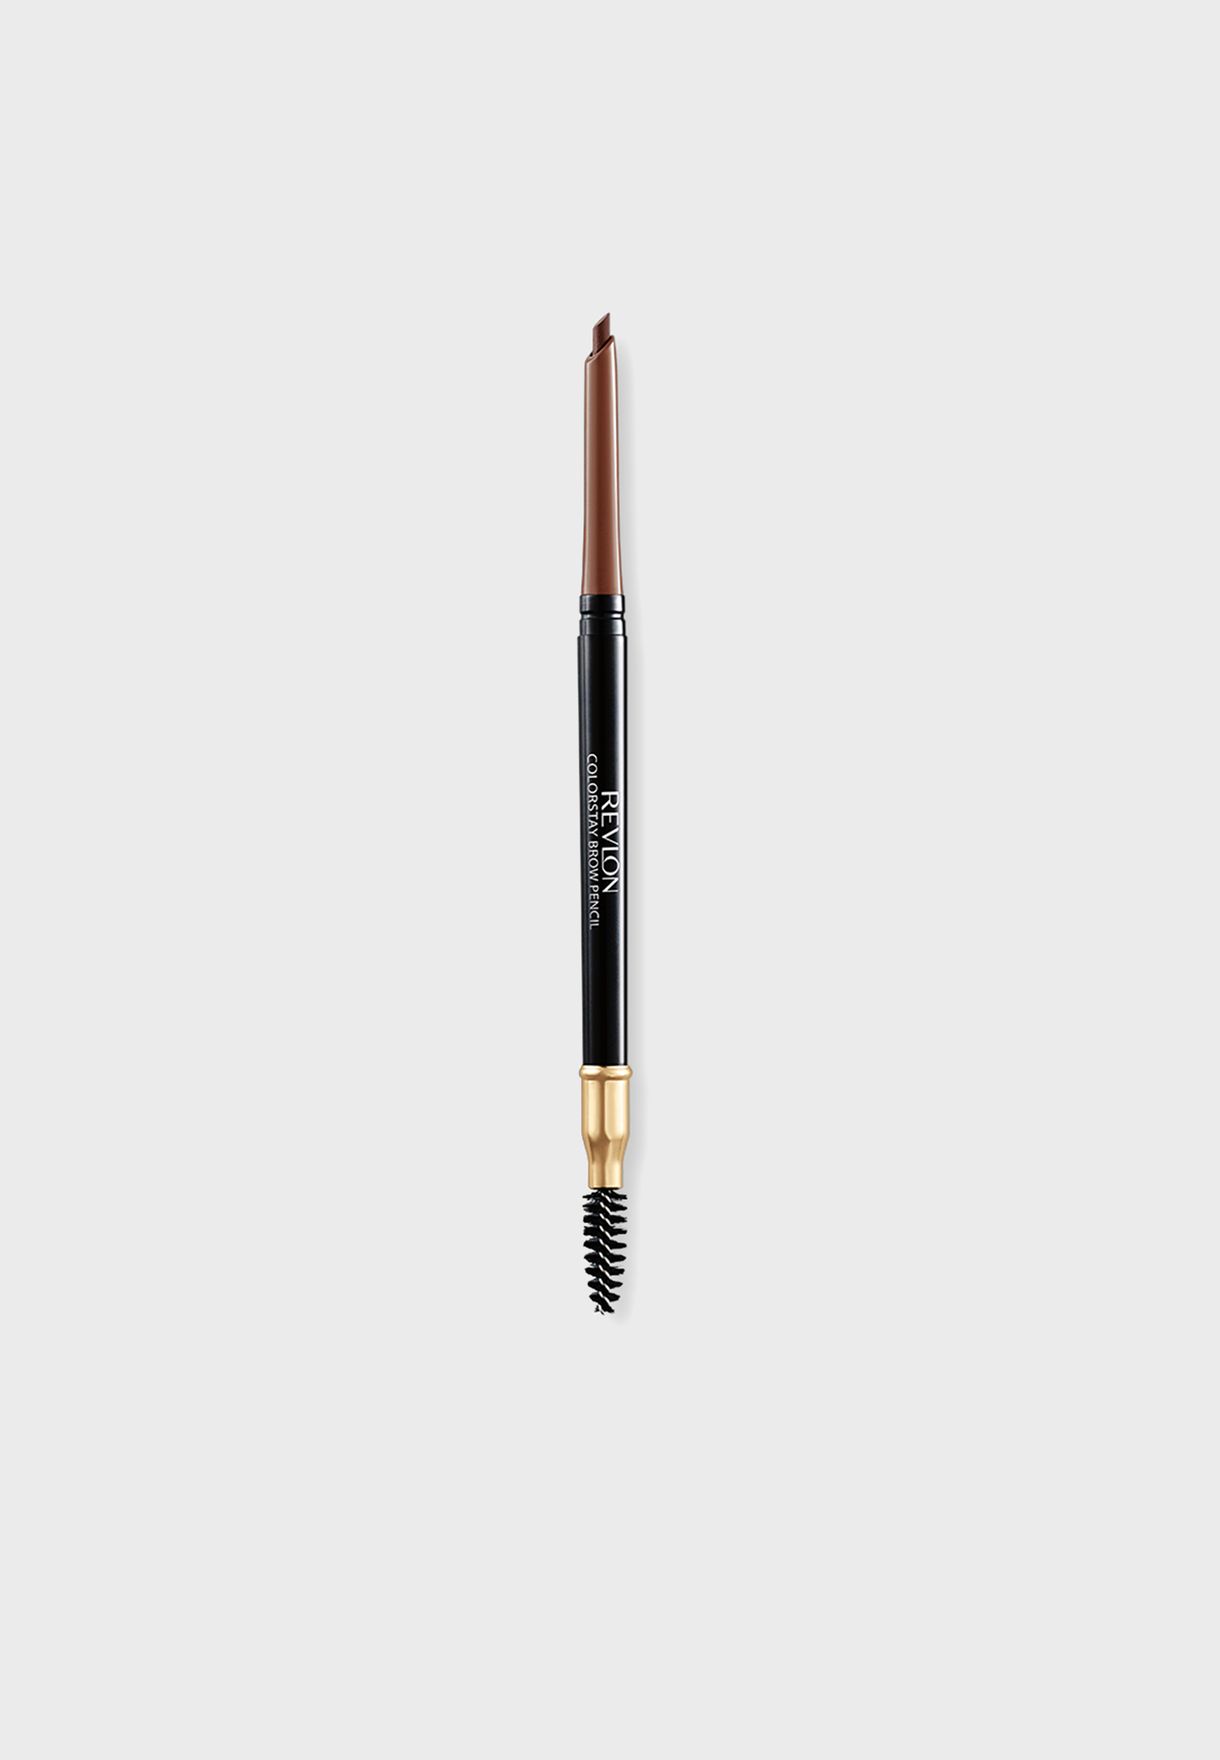   COLORSTAY BROW PENCIL - SOFT BROWN